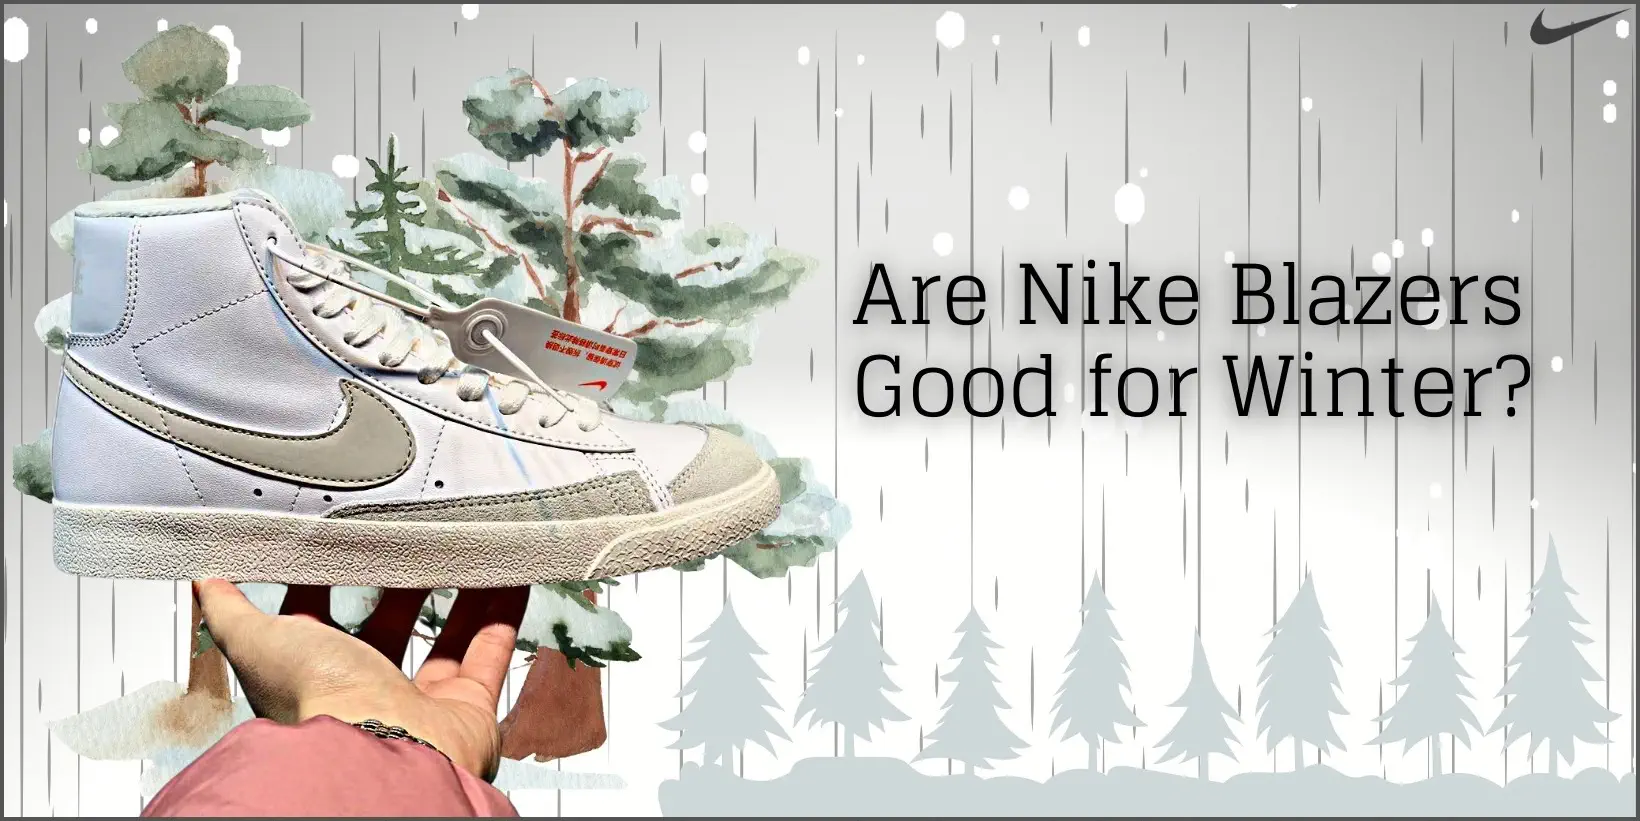 Are Nike Blazers Good for Winter?